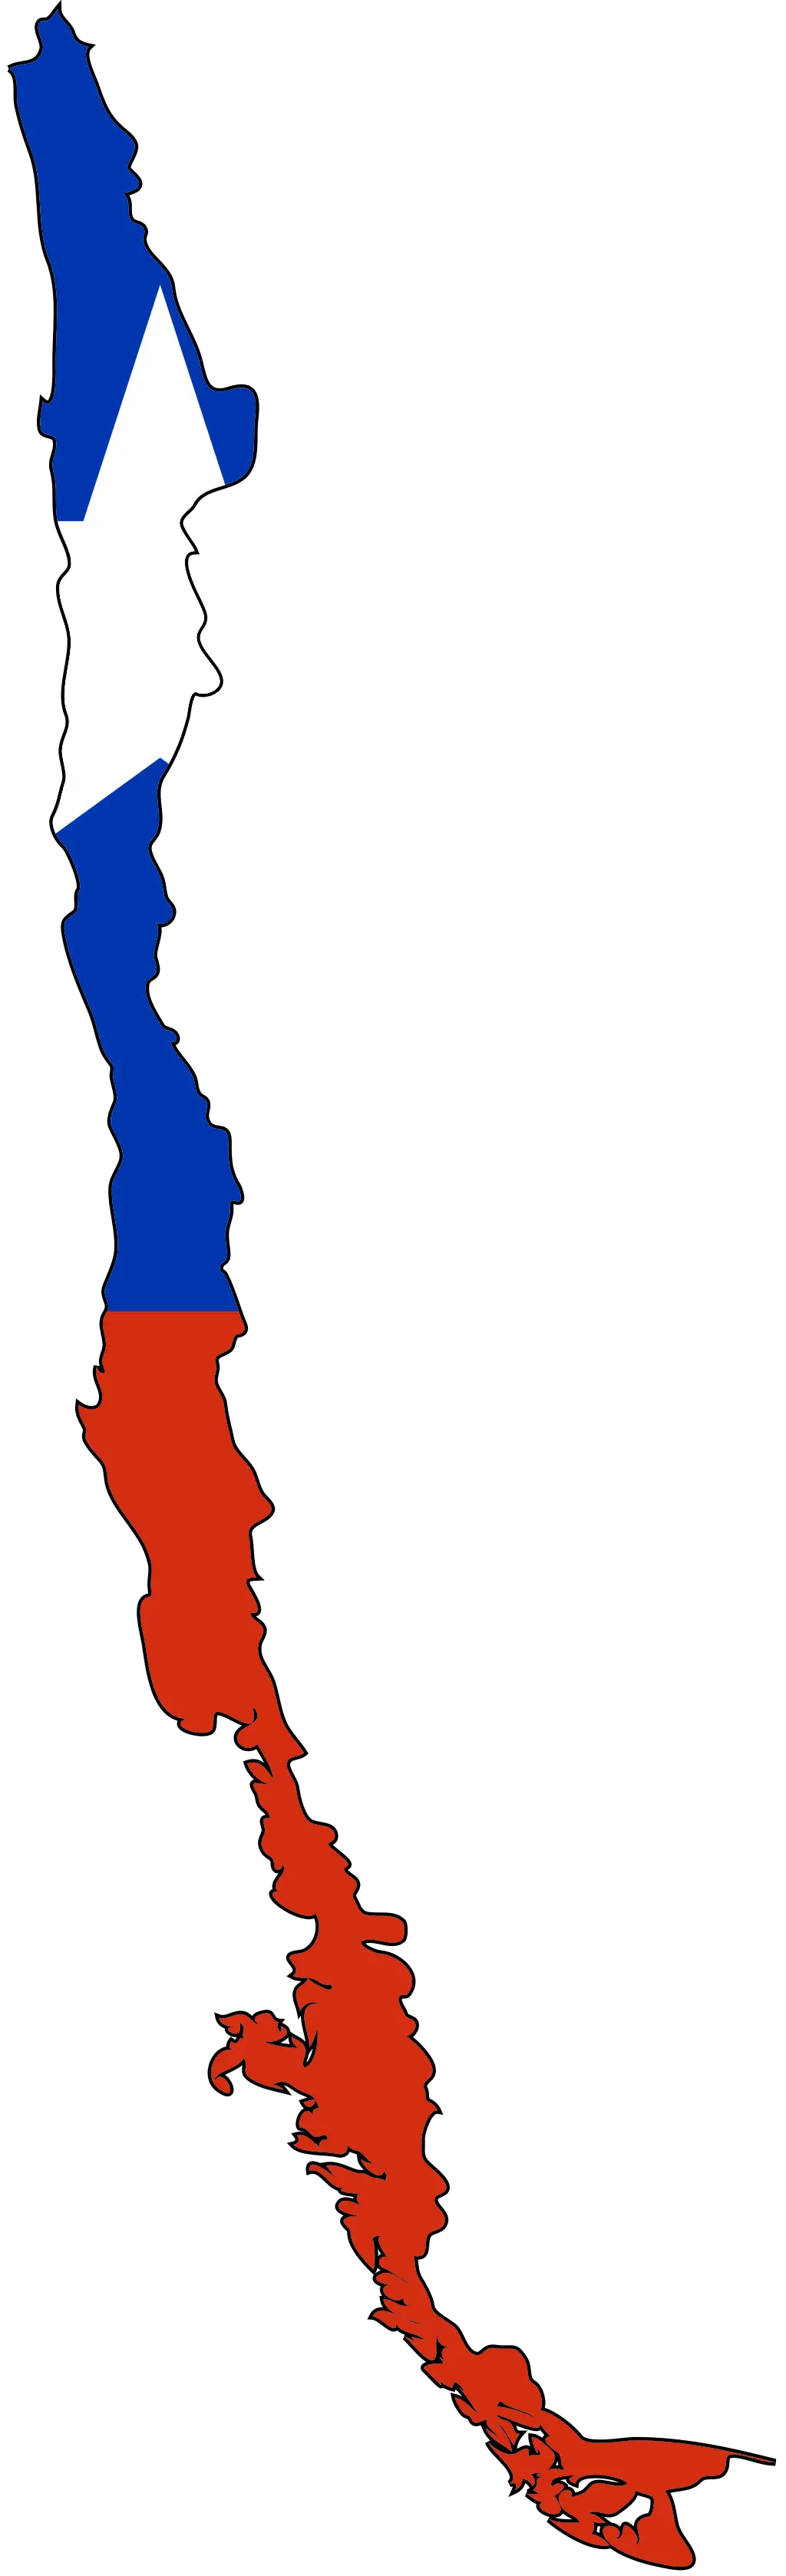 Chile Flag Map